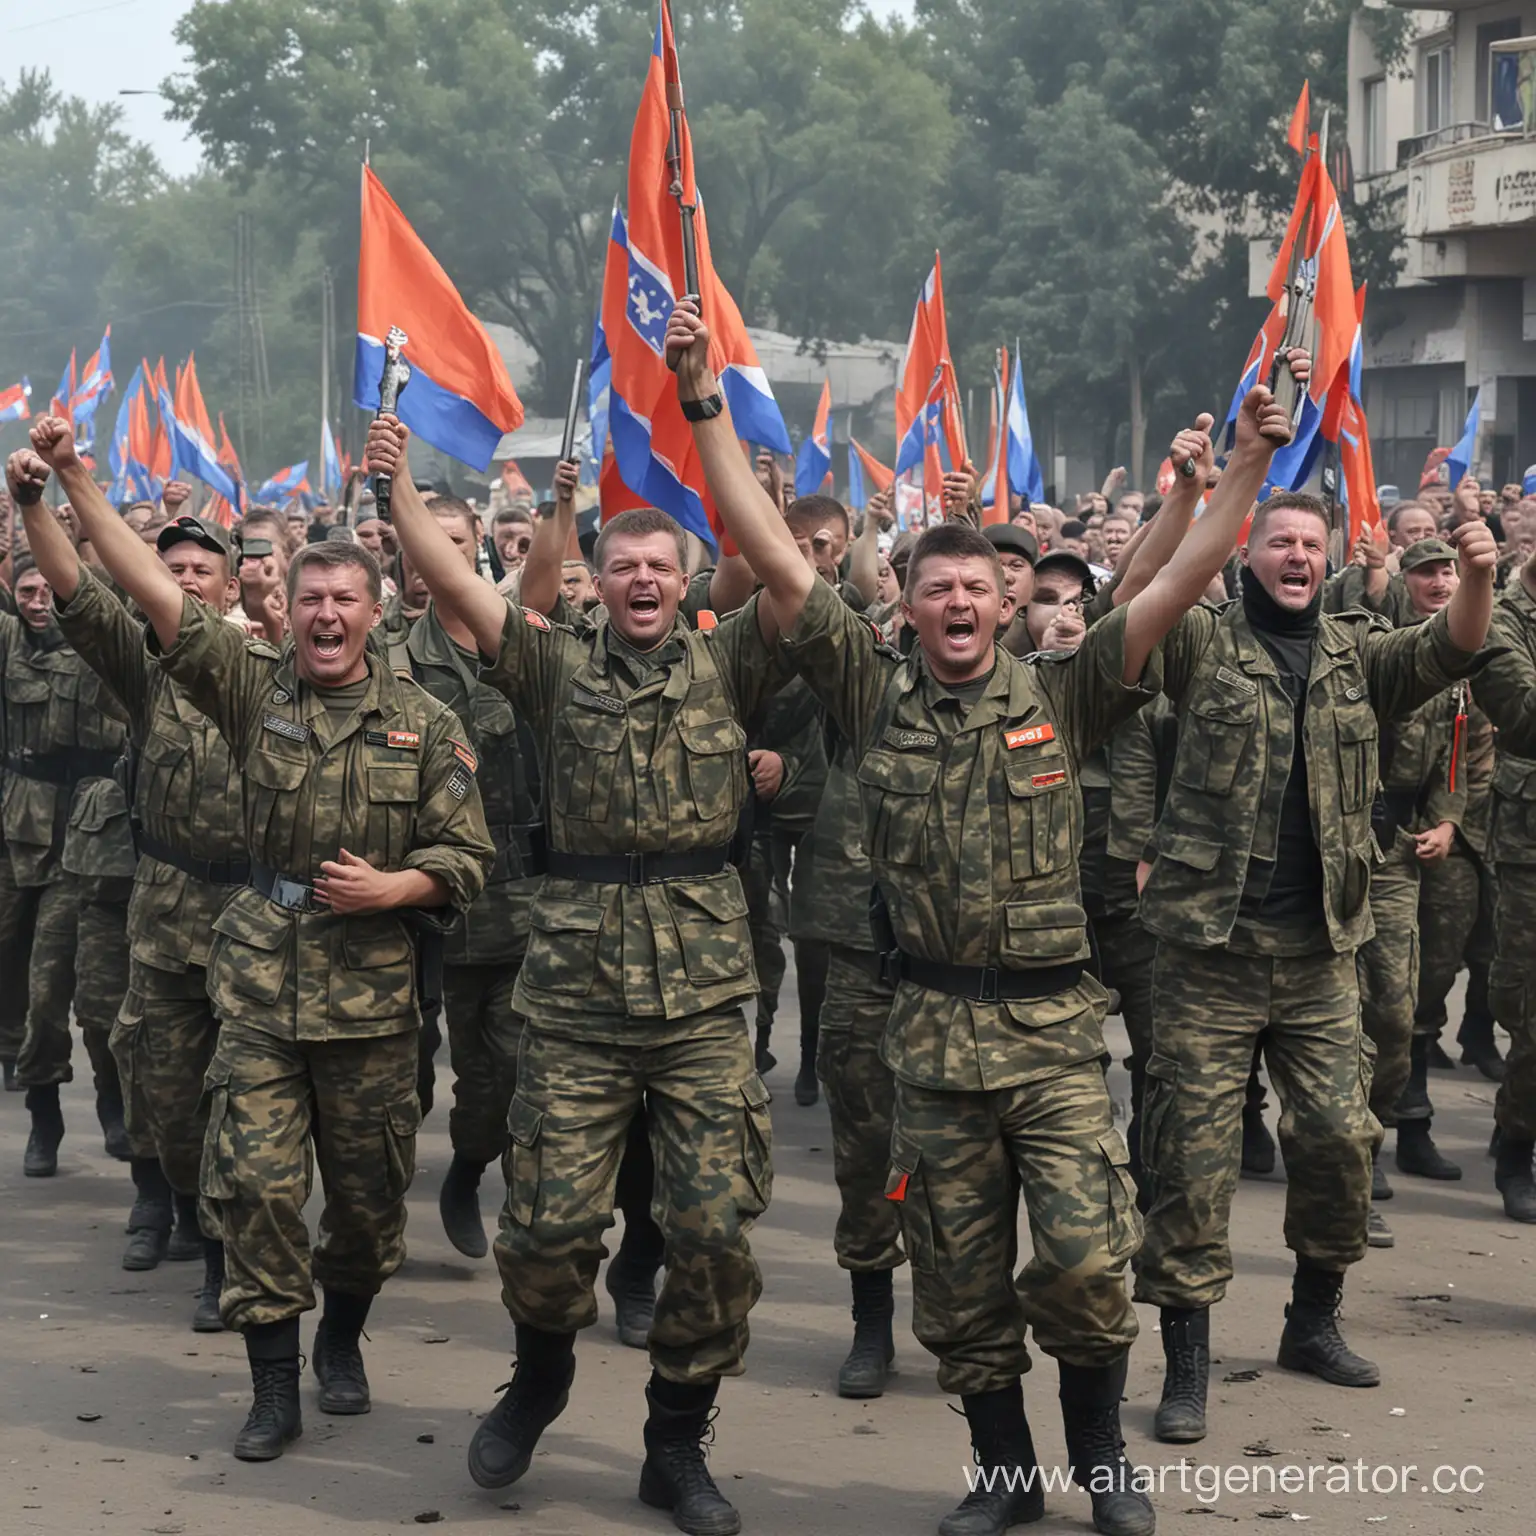 Donbass-Victory-Celebration-Unity-and-Resilience-in-the-Face-of-Adversity